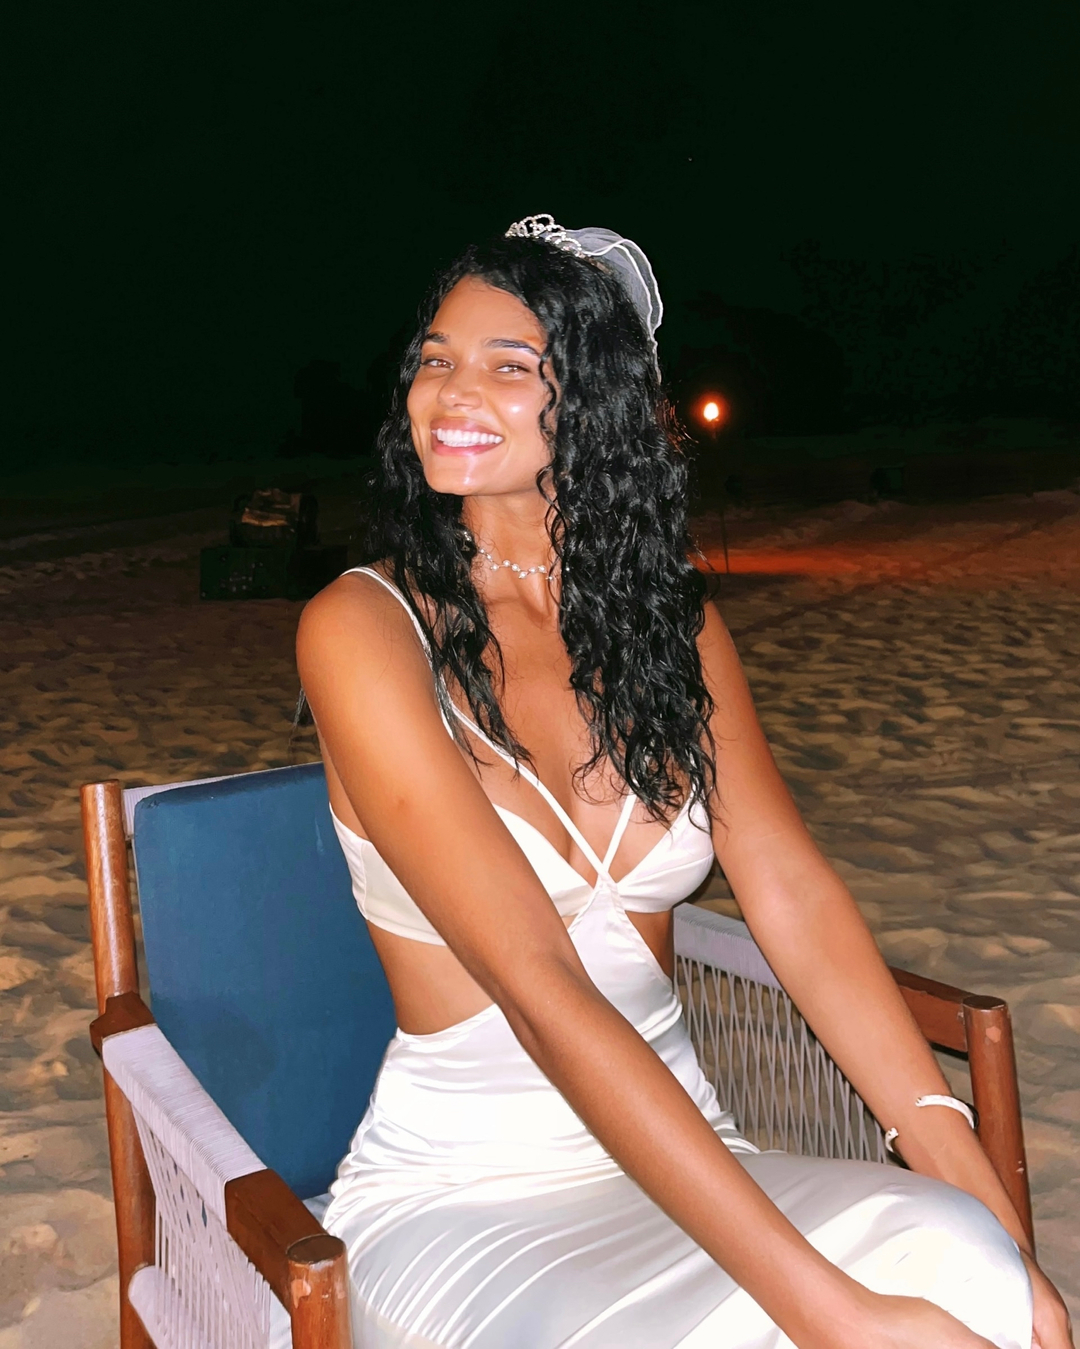 Creo que estoy enfermo telar Detectar Daniela Braga on Twitter: "Tbt when I was a bride… for the whole  week🤍👰🏻‍♀️ Wearing @revolve https://t.co/o9UUaDGdVy" / Twitter